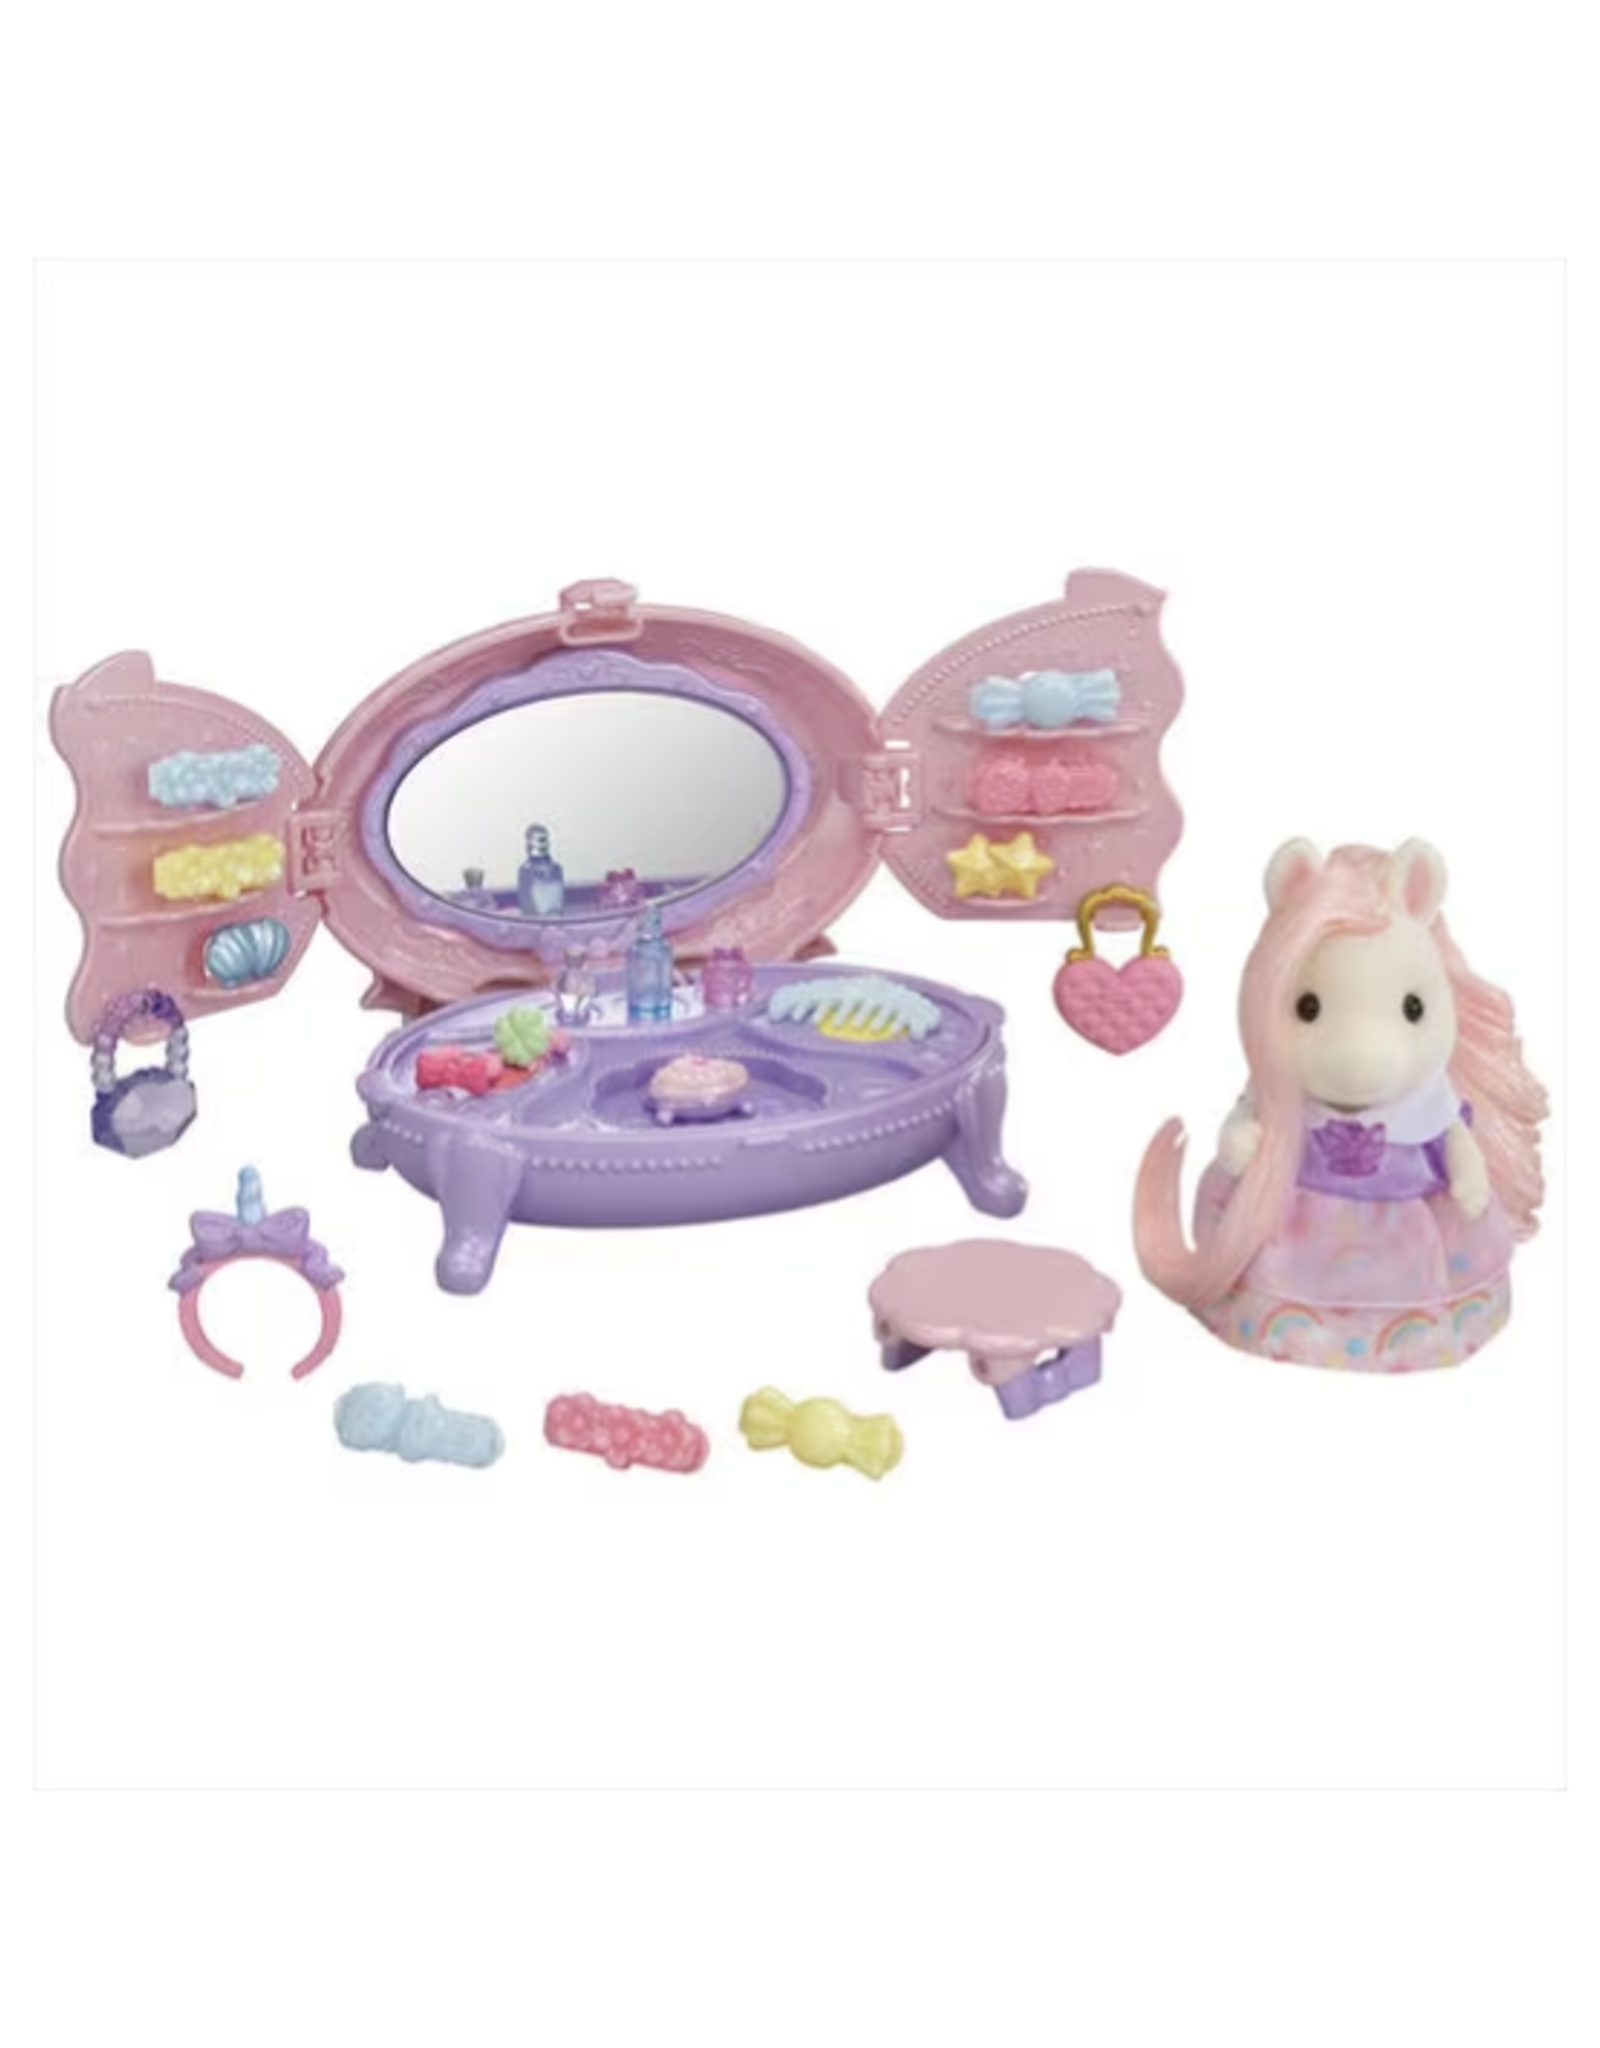 Calico Critters Calico Critters - Pony's Vanity Dresser Set